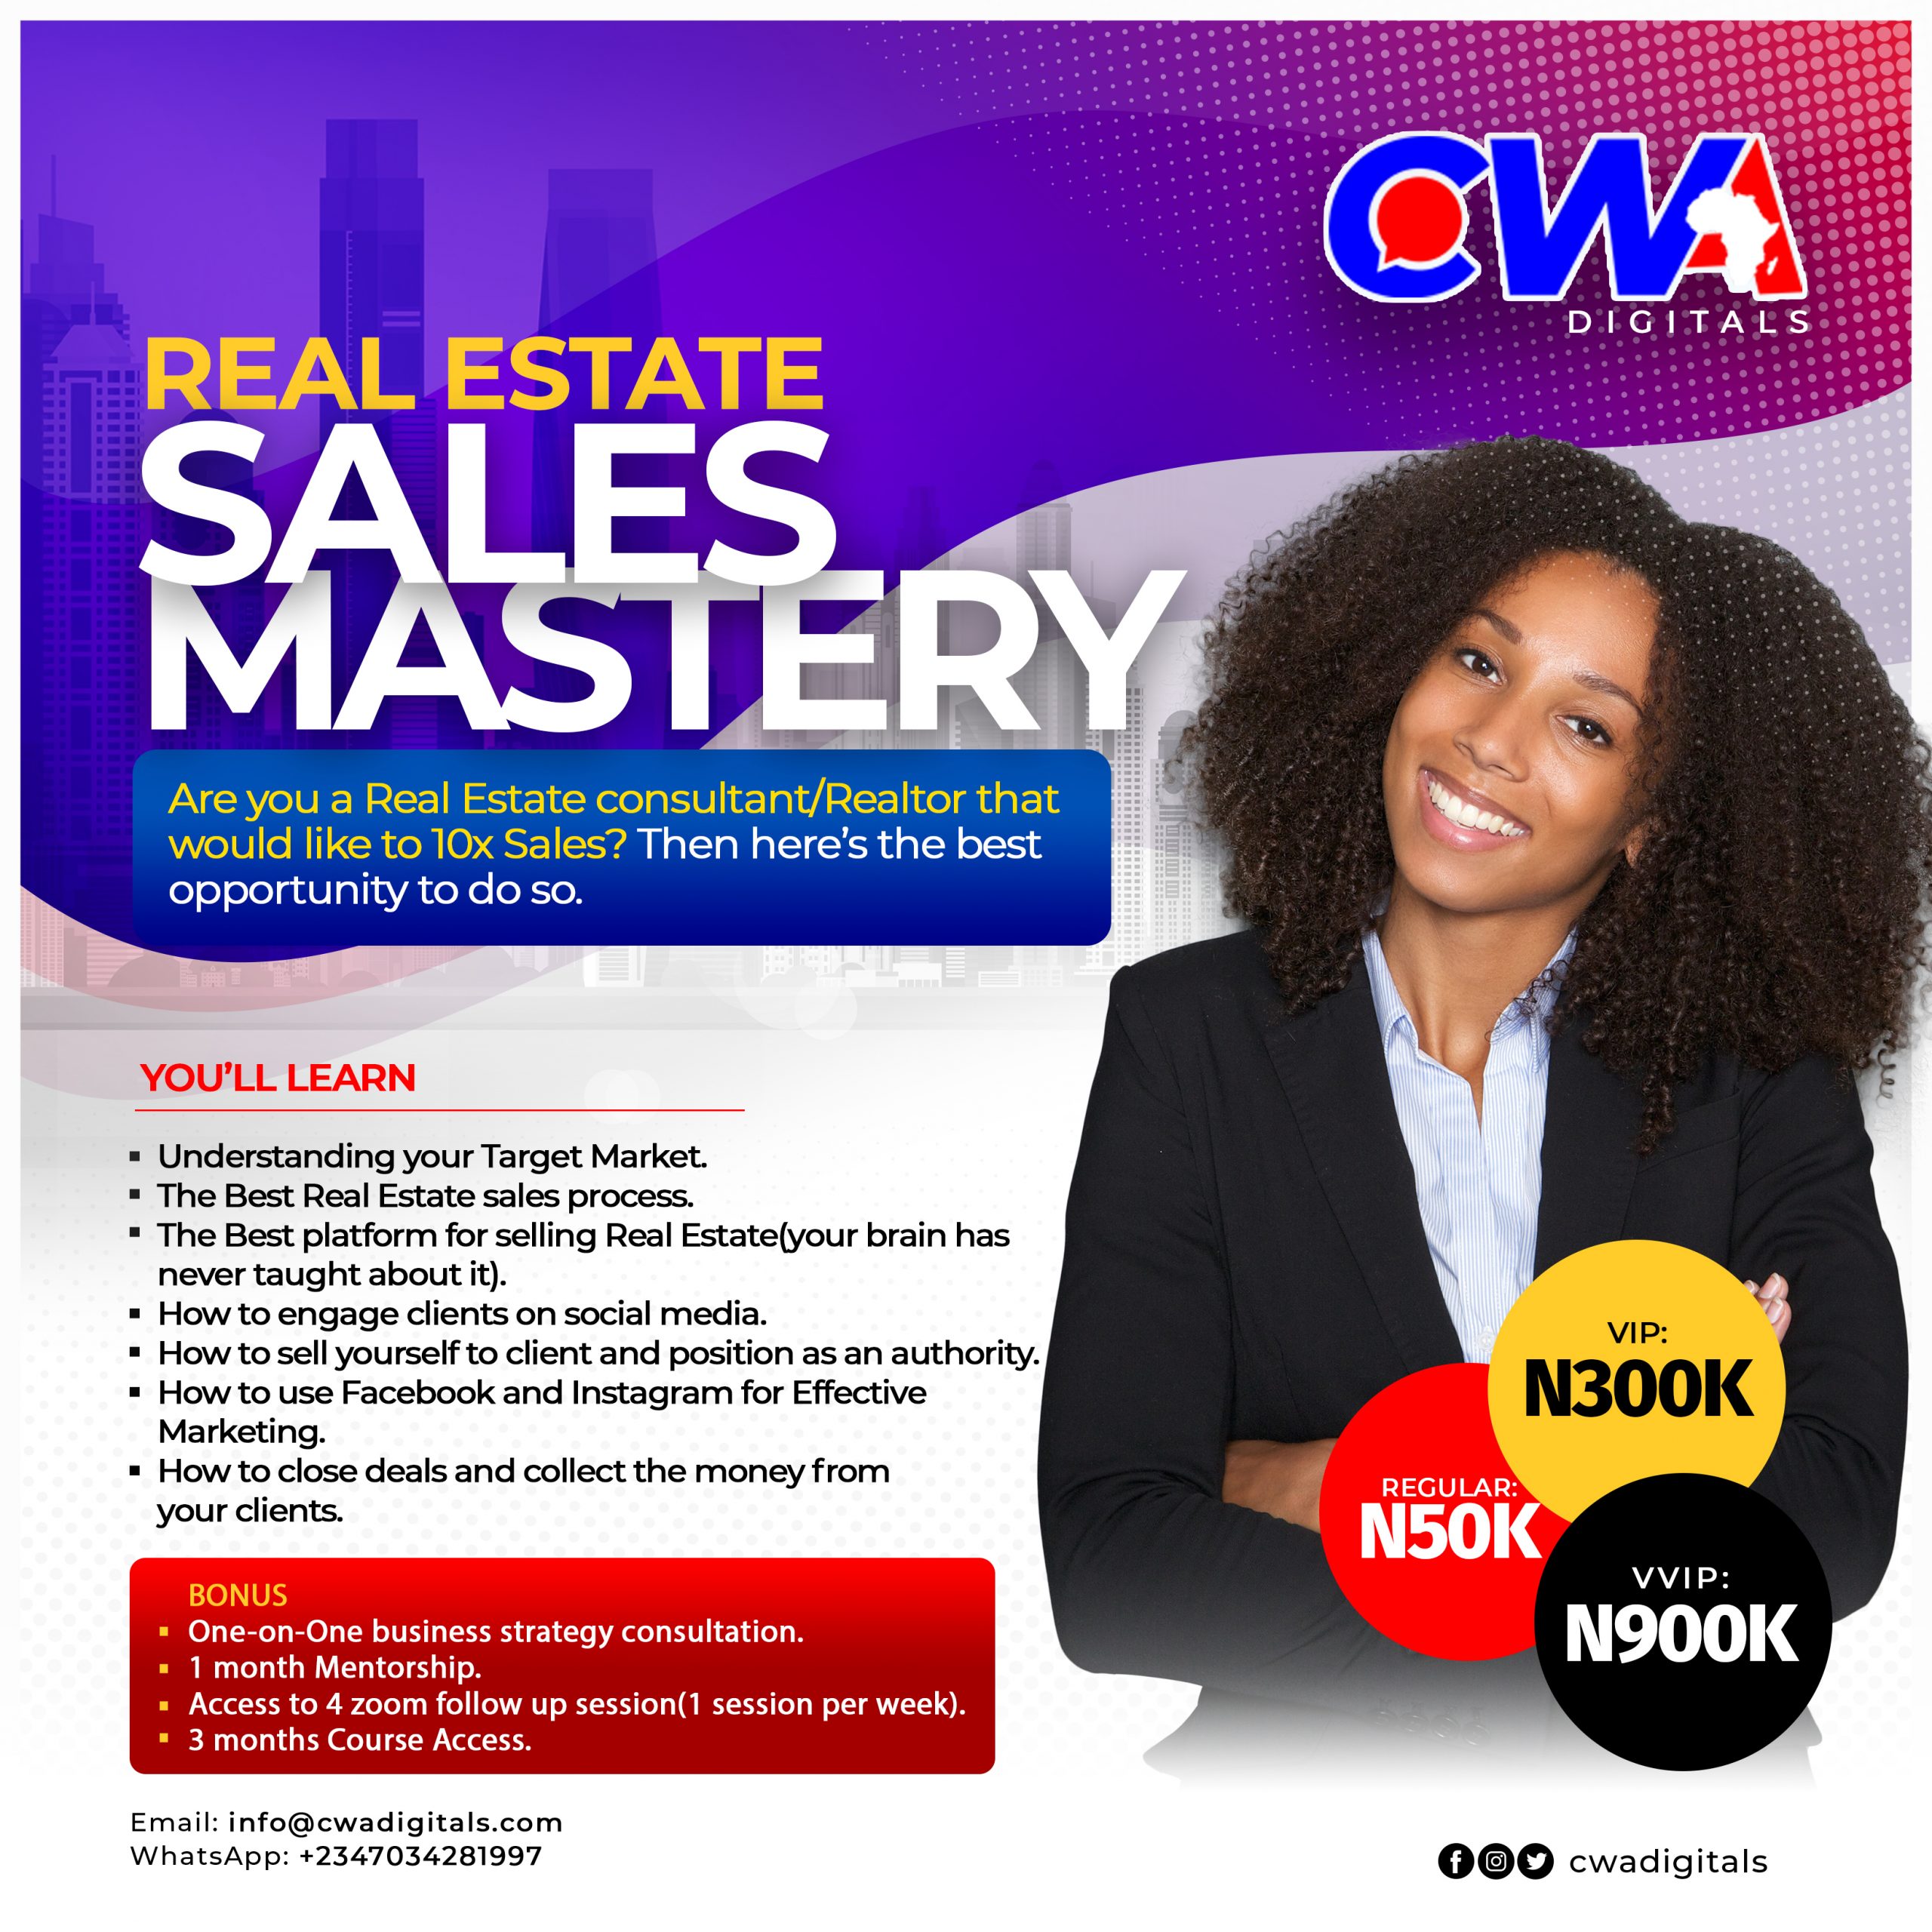 REAL ESTATE SALES MASTERY